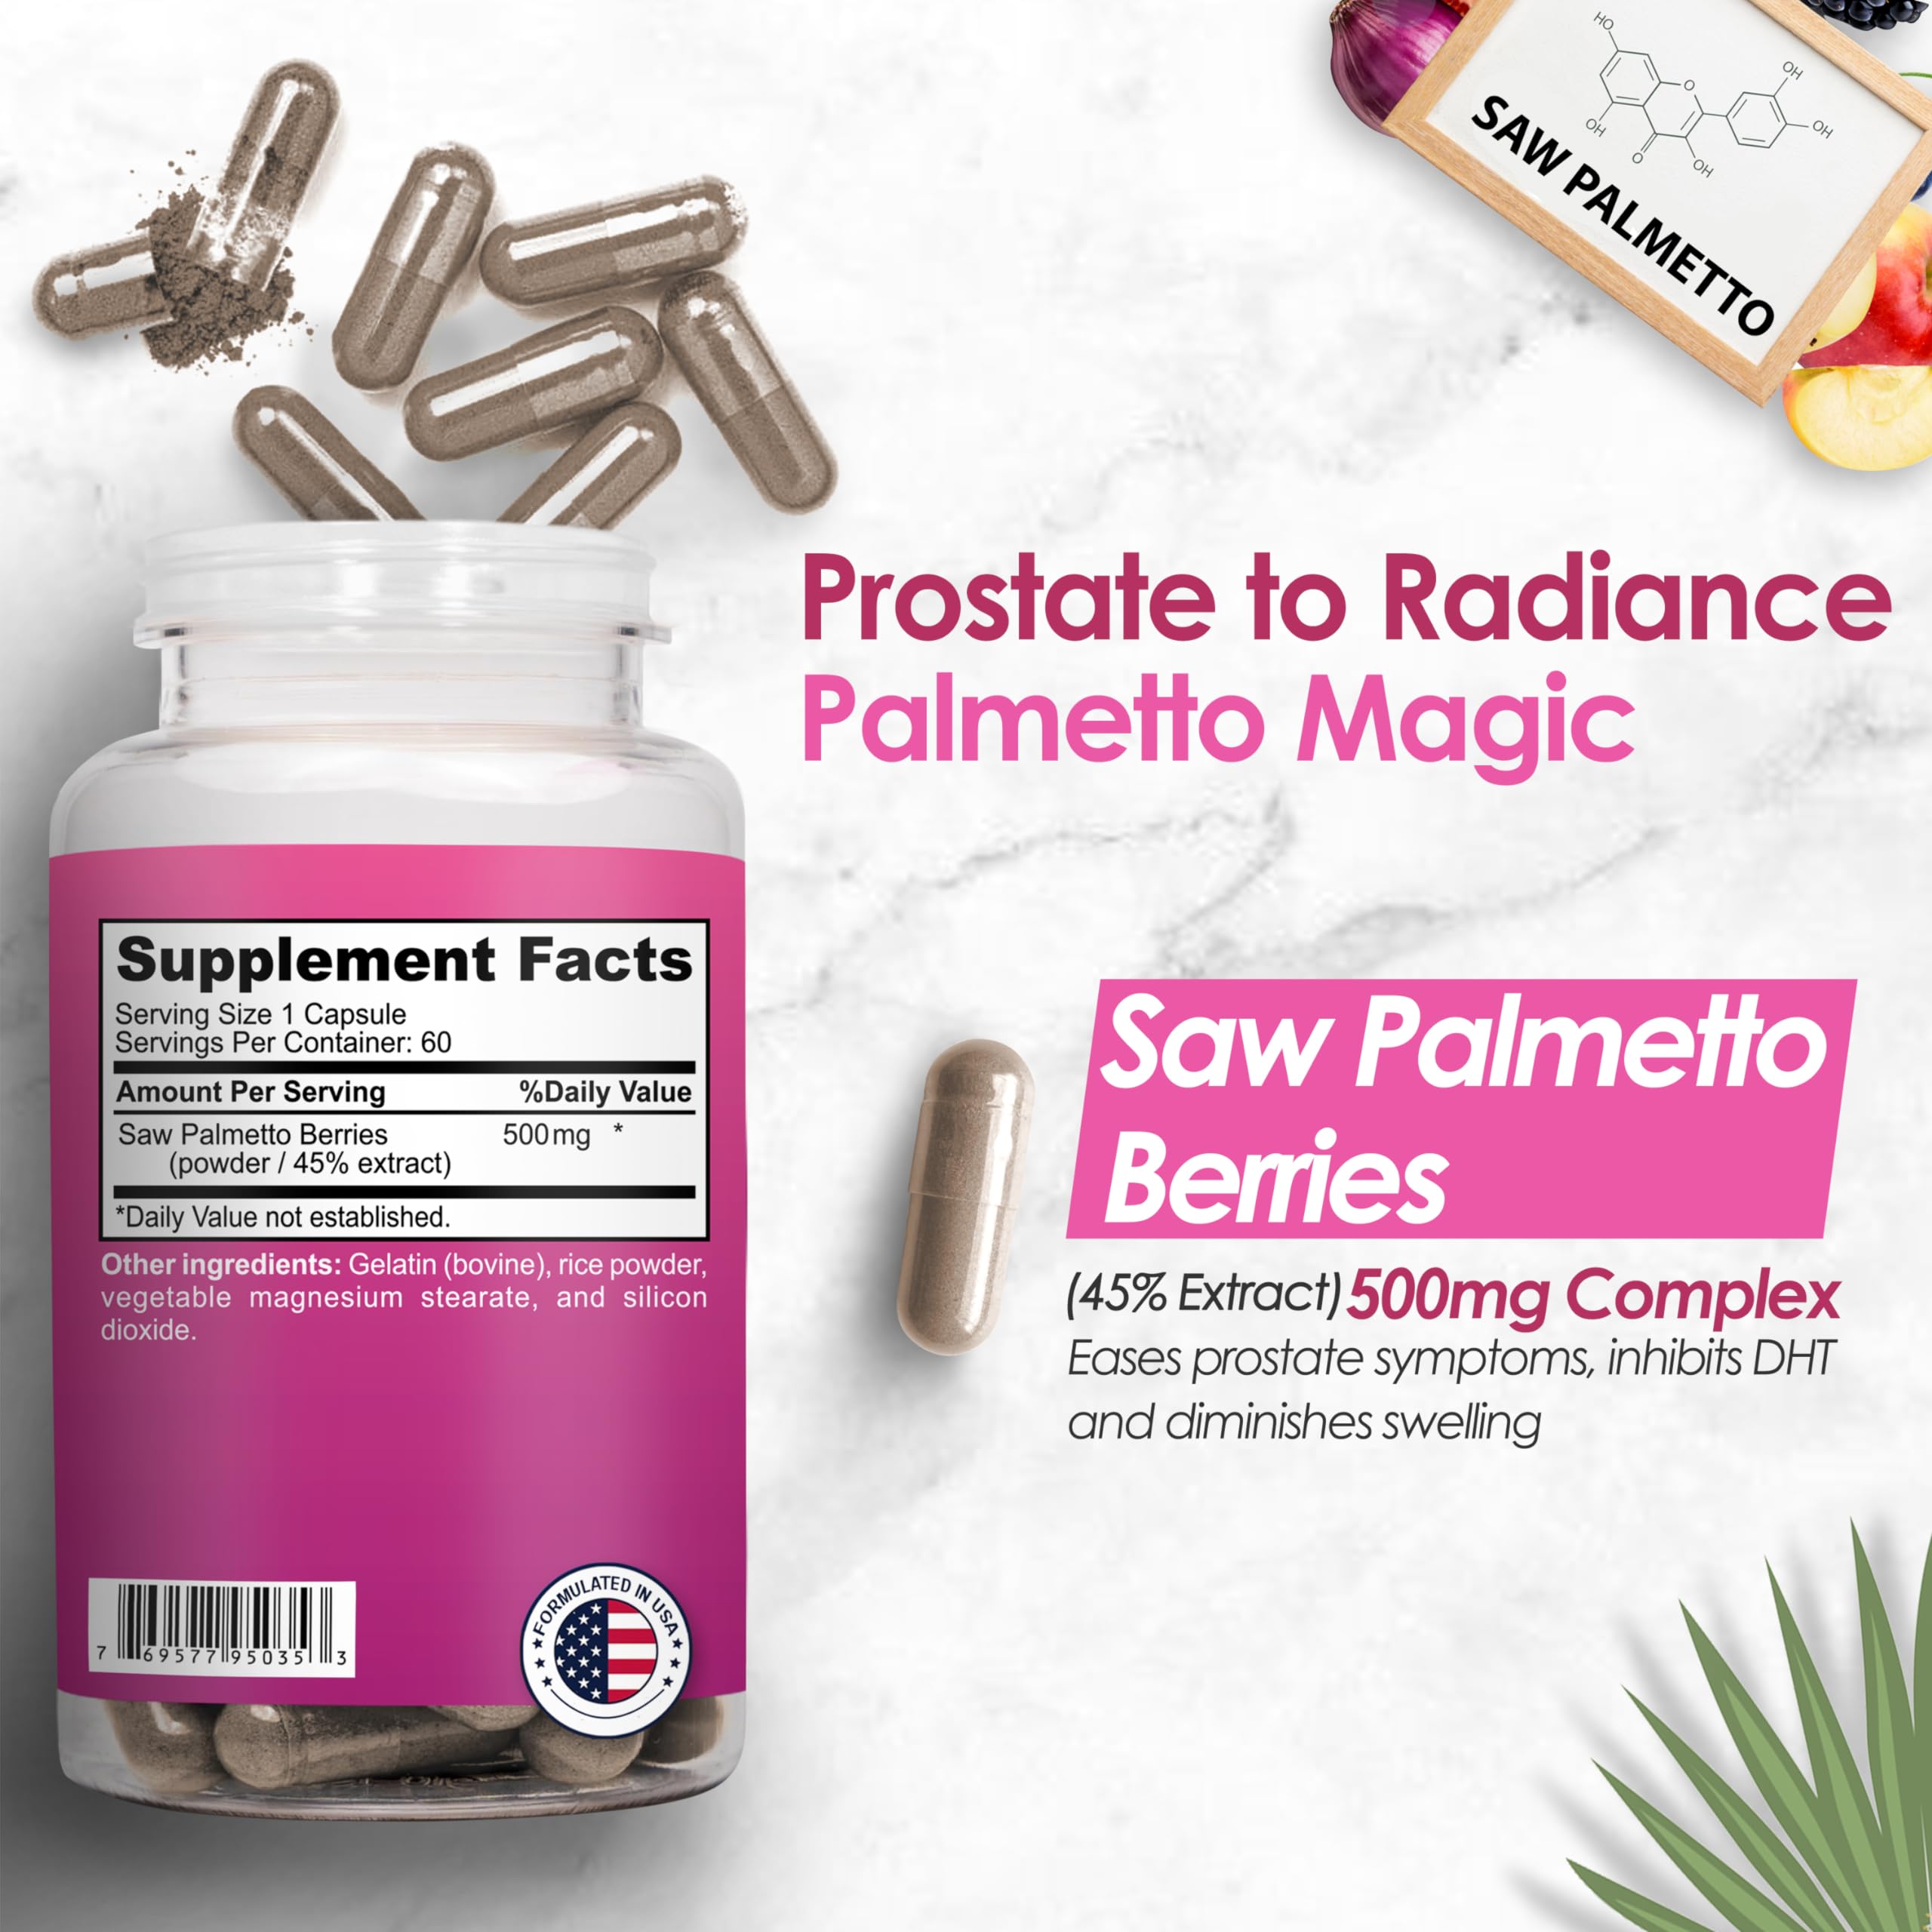 Nutradora Total Wellness Combo: Saw Palmetto Extract & Zinc Supplement for Hair, Skin, Prostate, and Immune Health